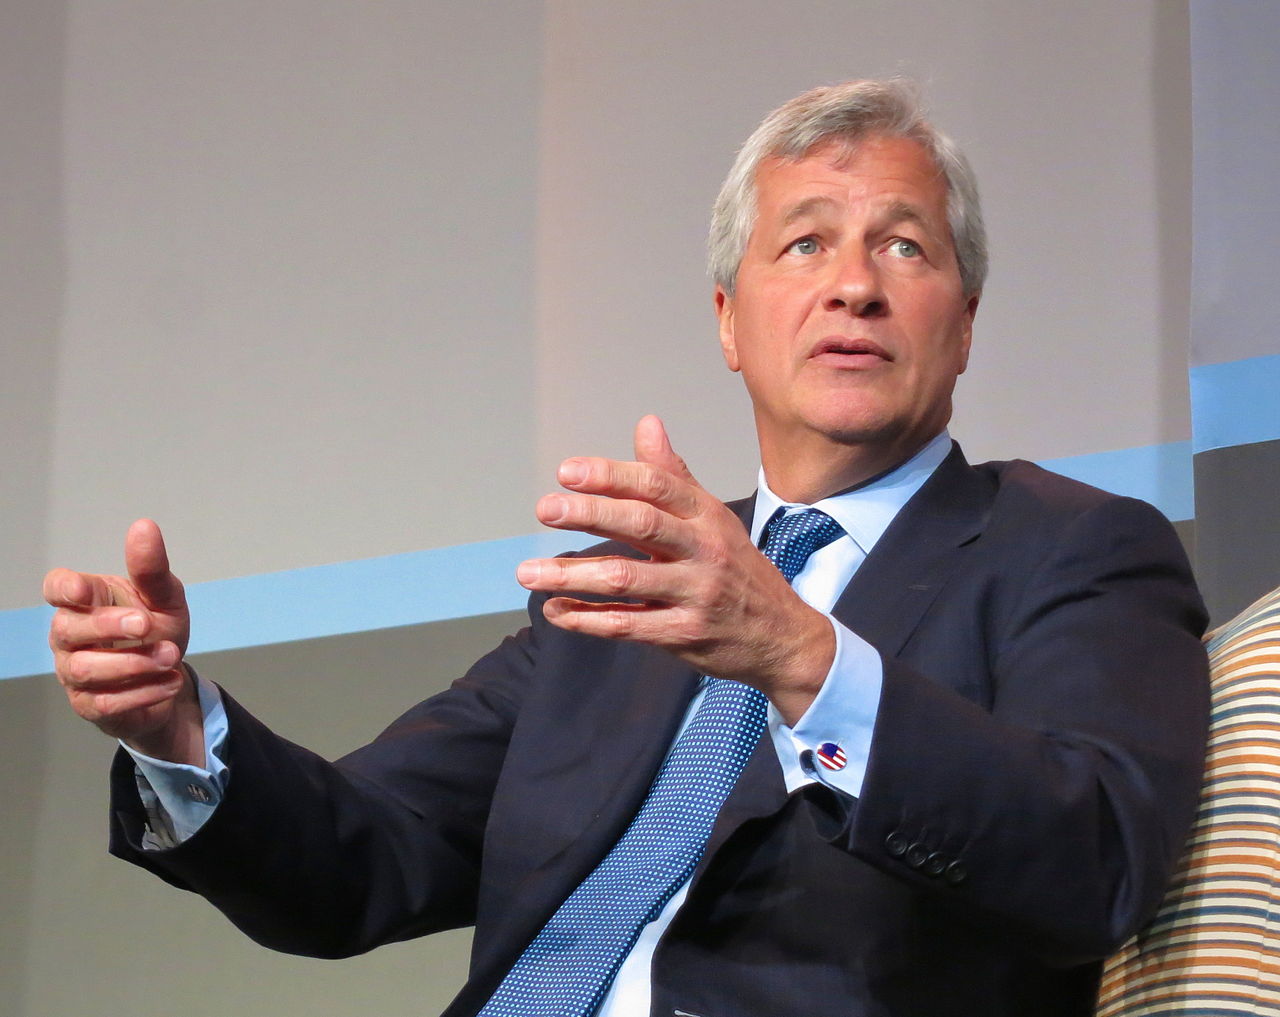 Image: JPMorgan CEO Jamie Dimon: We have it completely backwards on green energy